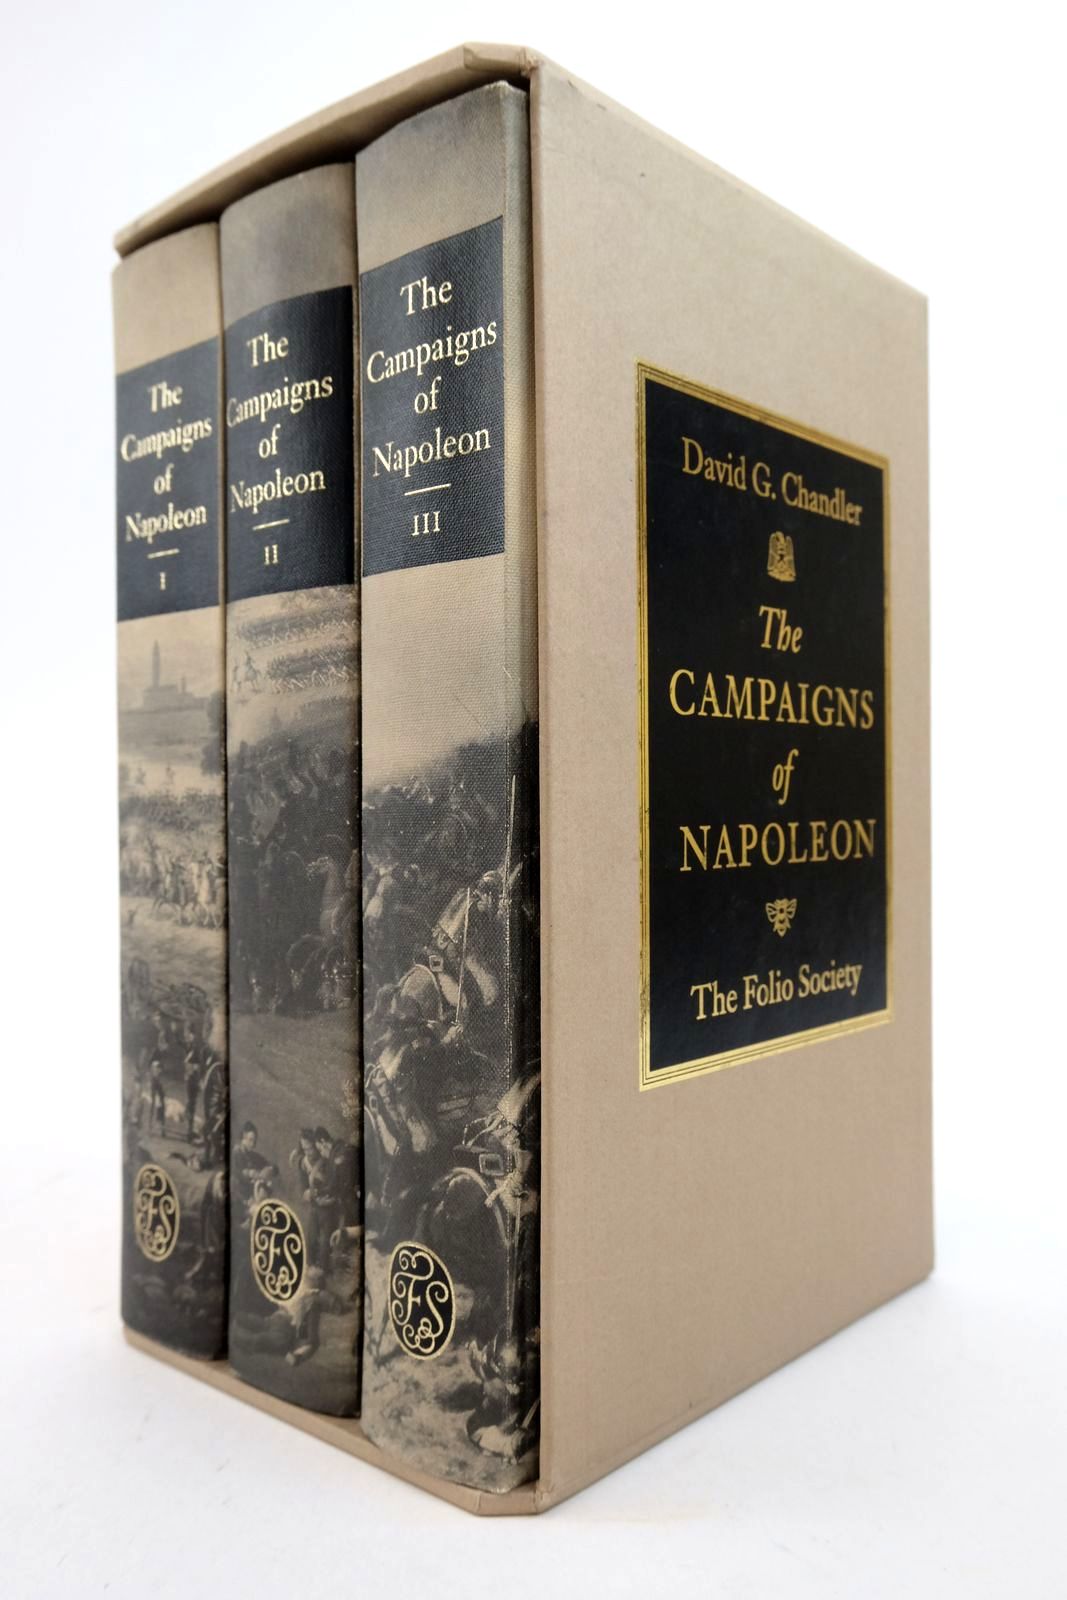 Photo of THE CAMPAIGNS OF NAPOLEON (3 VOLUMES) written by Chandler, David G. published by Folio Society (STOCK CODE: 2140938)  for sale by Stella & Rose's Books